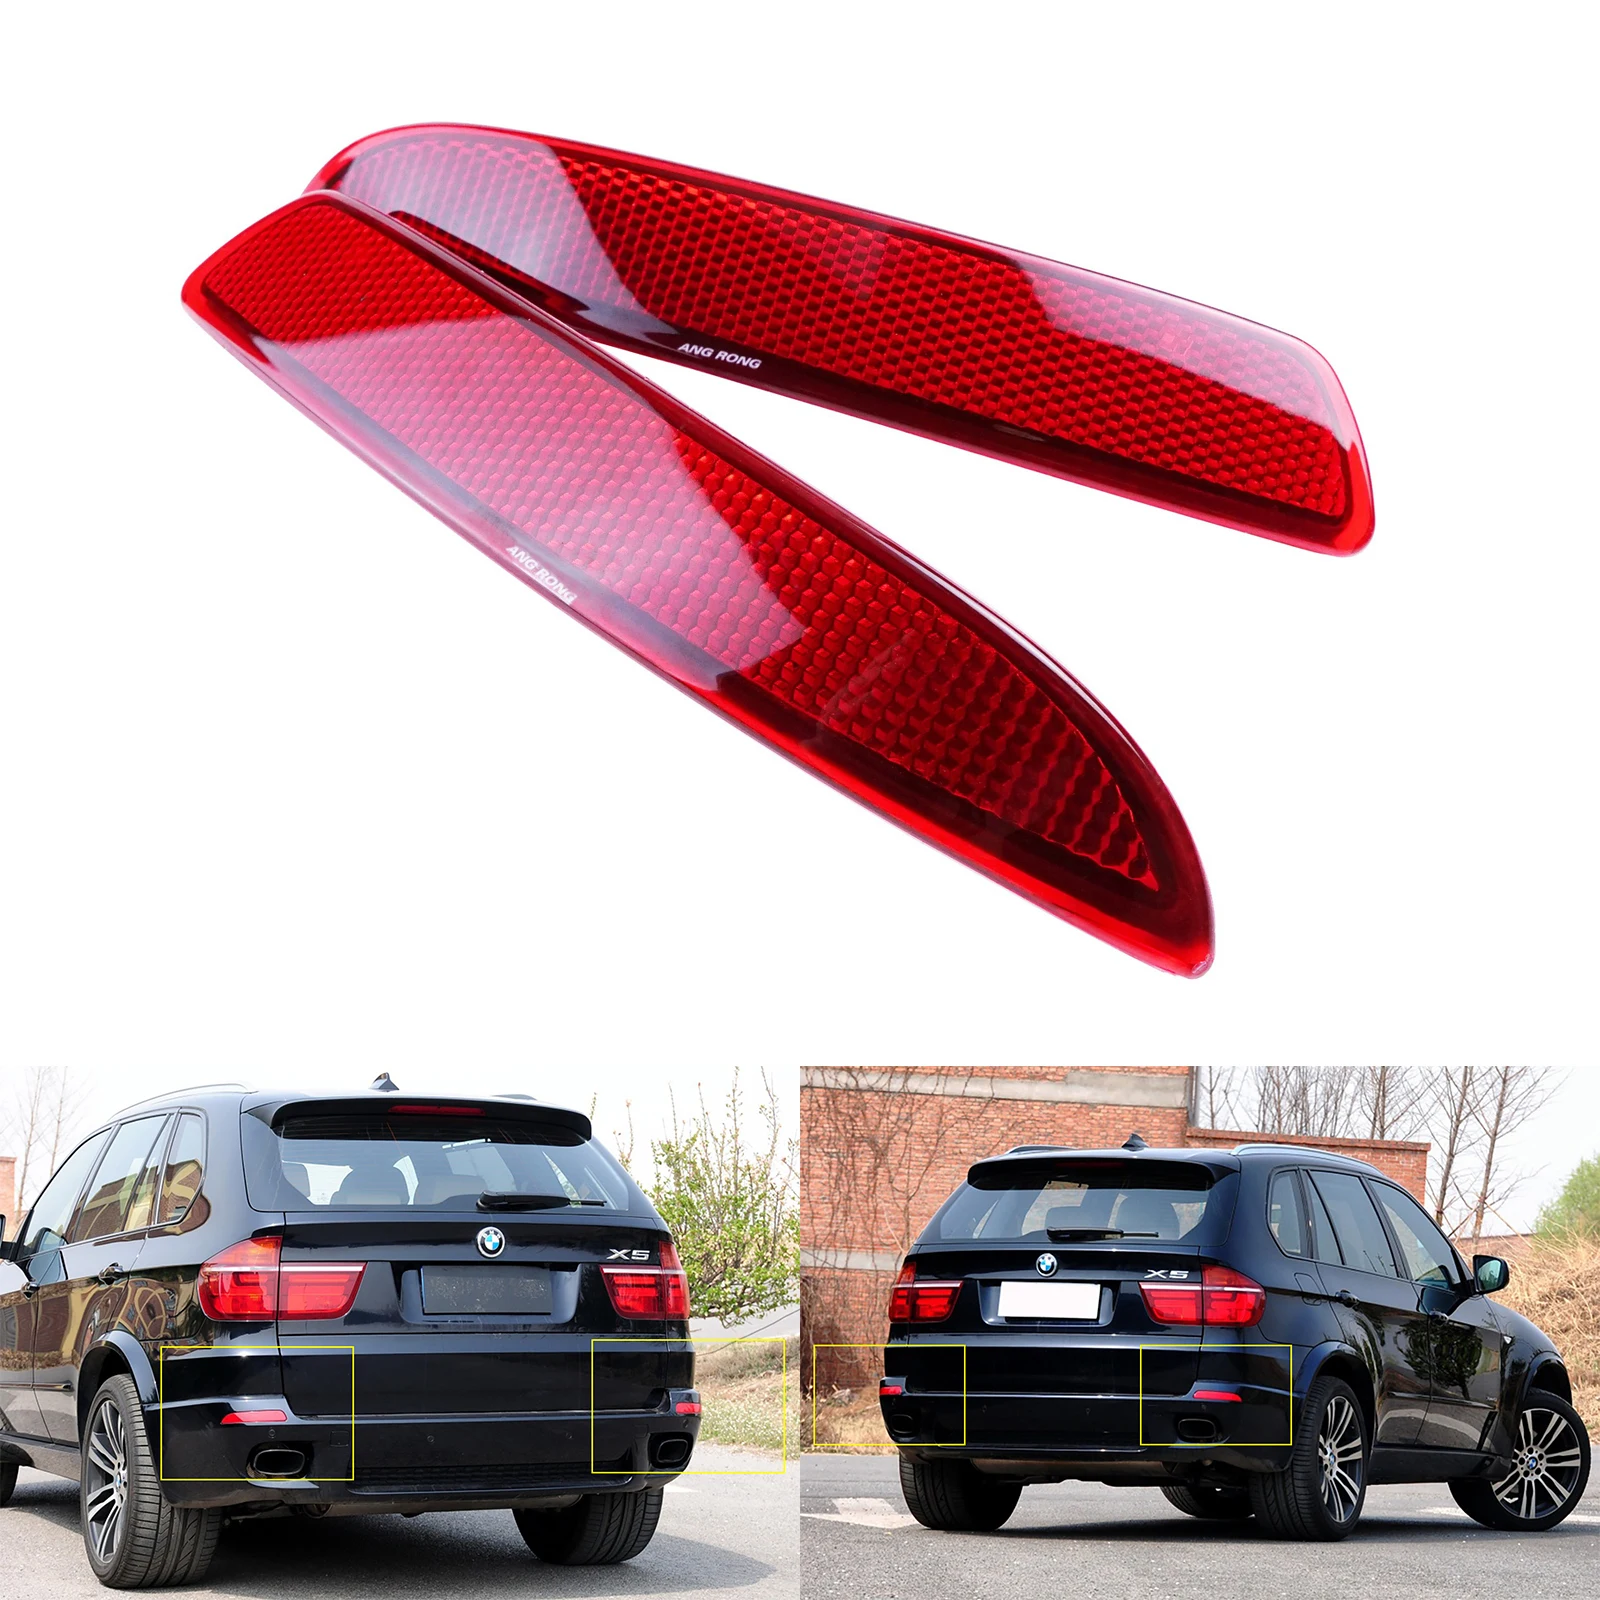 ANGRONG Red Lens Rear Bumper Reflector No Light L+R Pair For BMW X5 E70 2006-2013